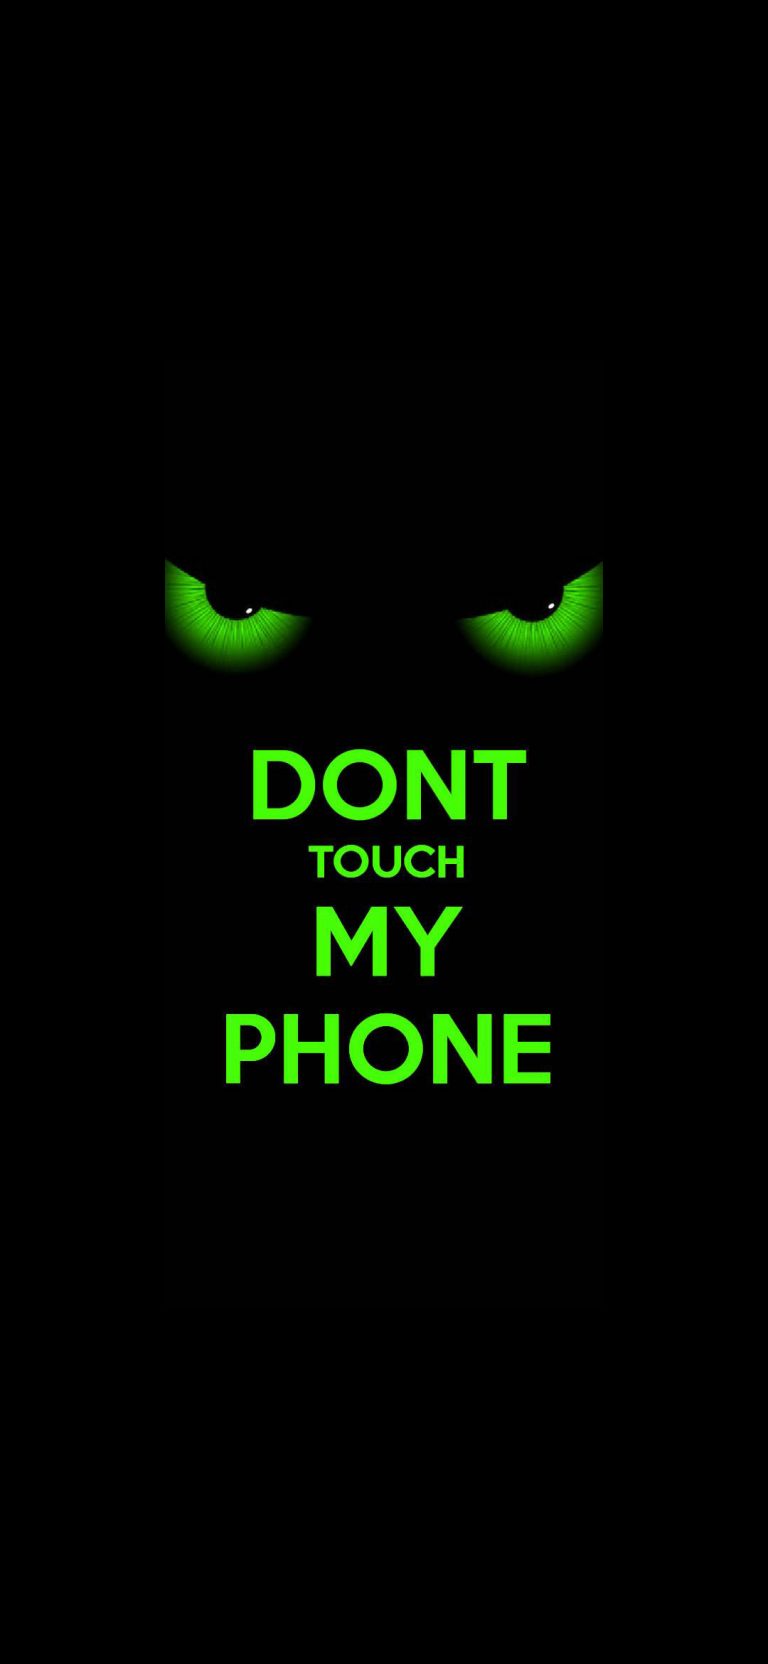 Dont Touch Scary Lock Screen Wallpaper - 1080x2340